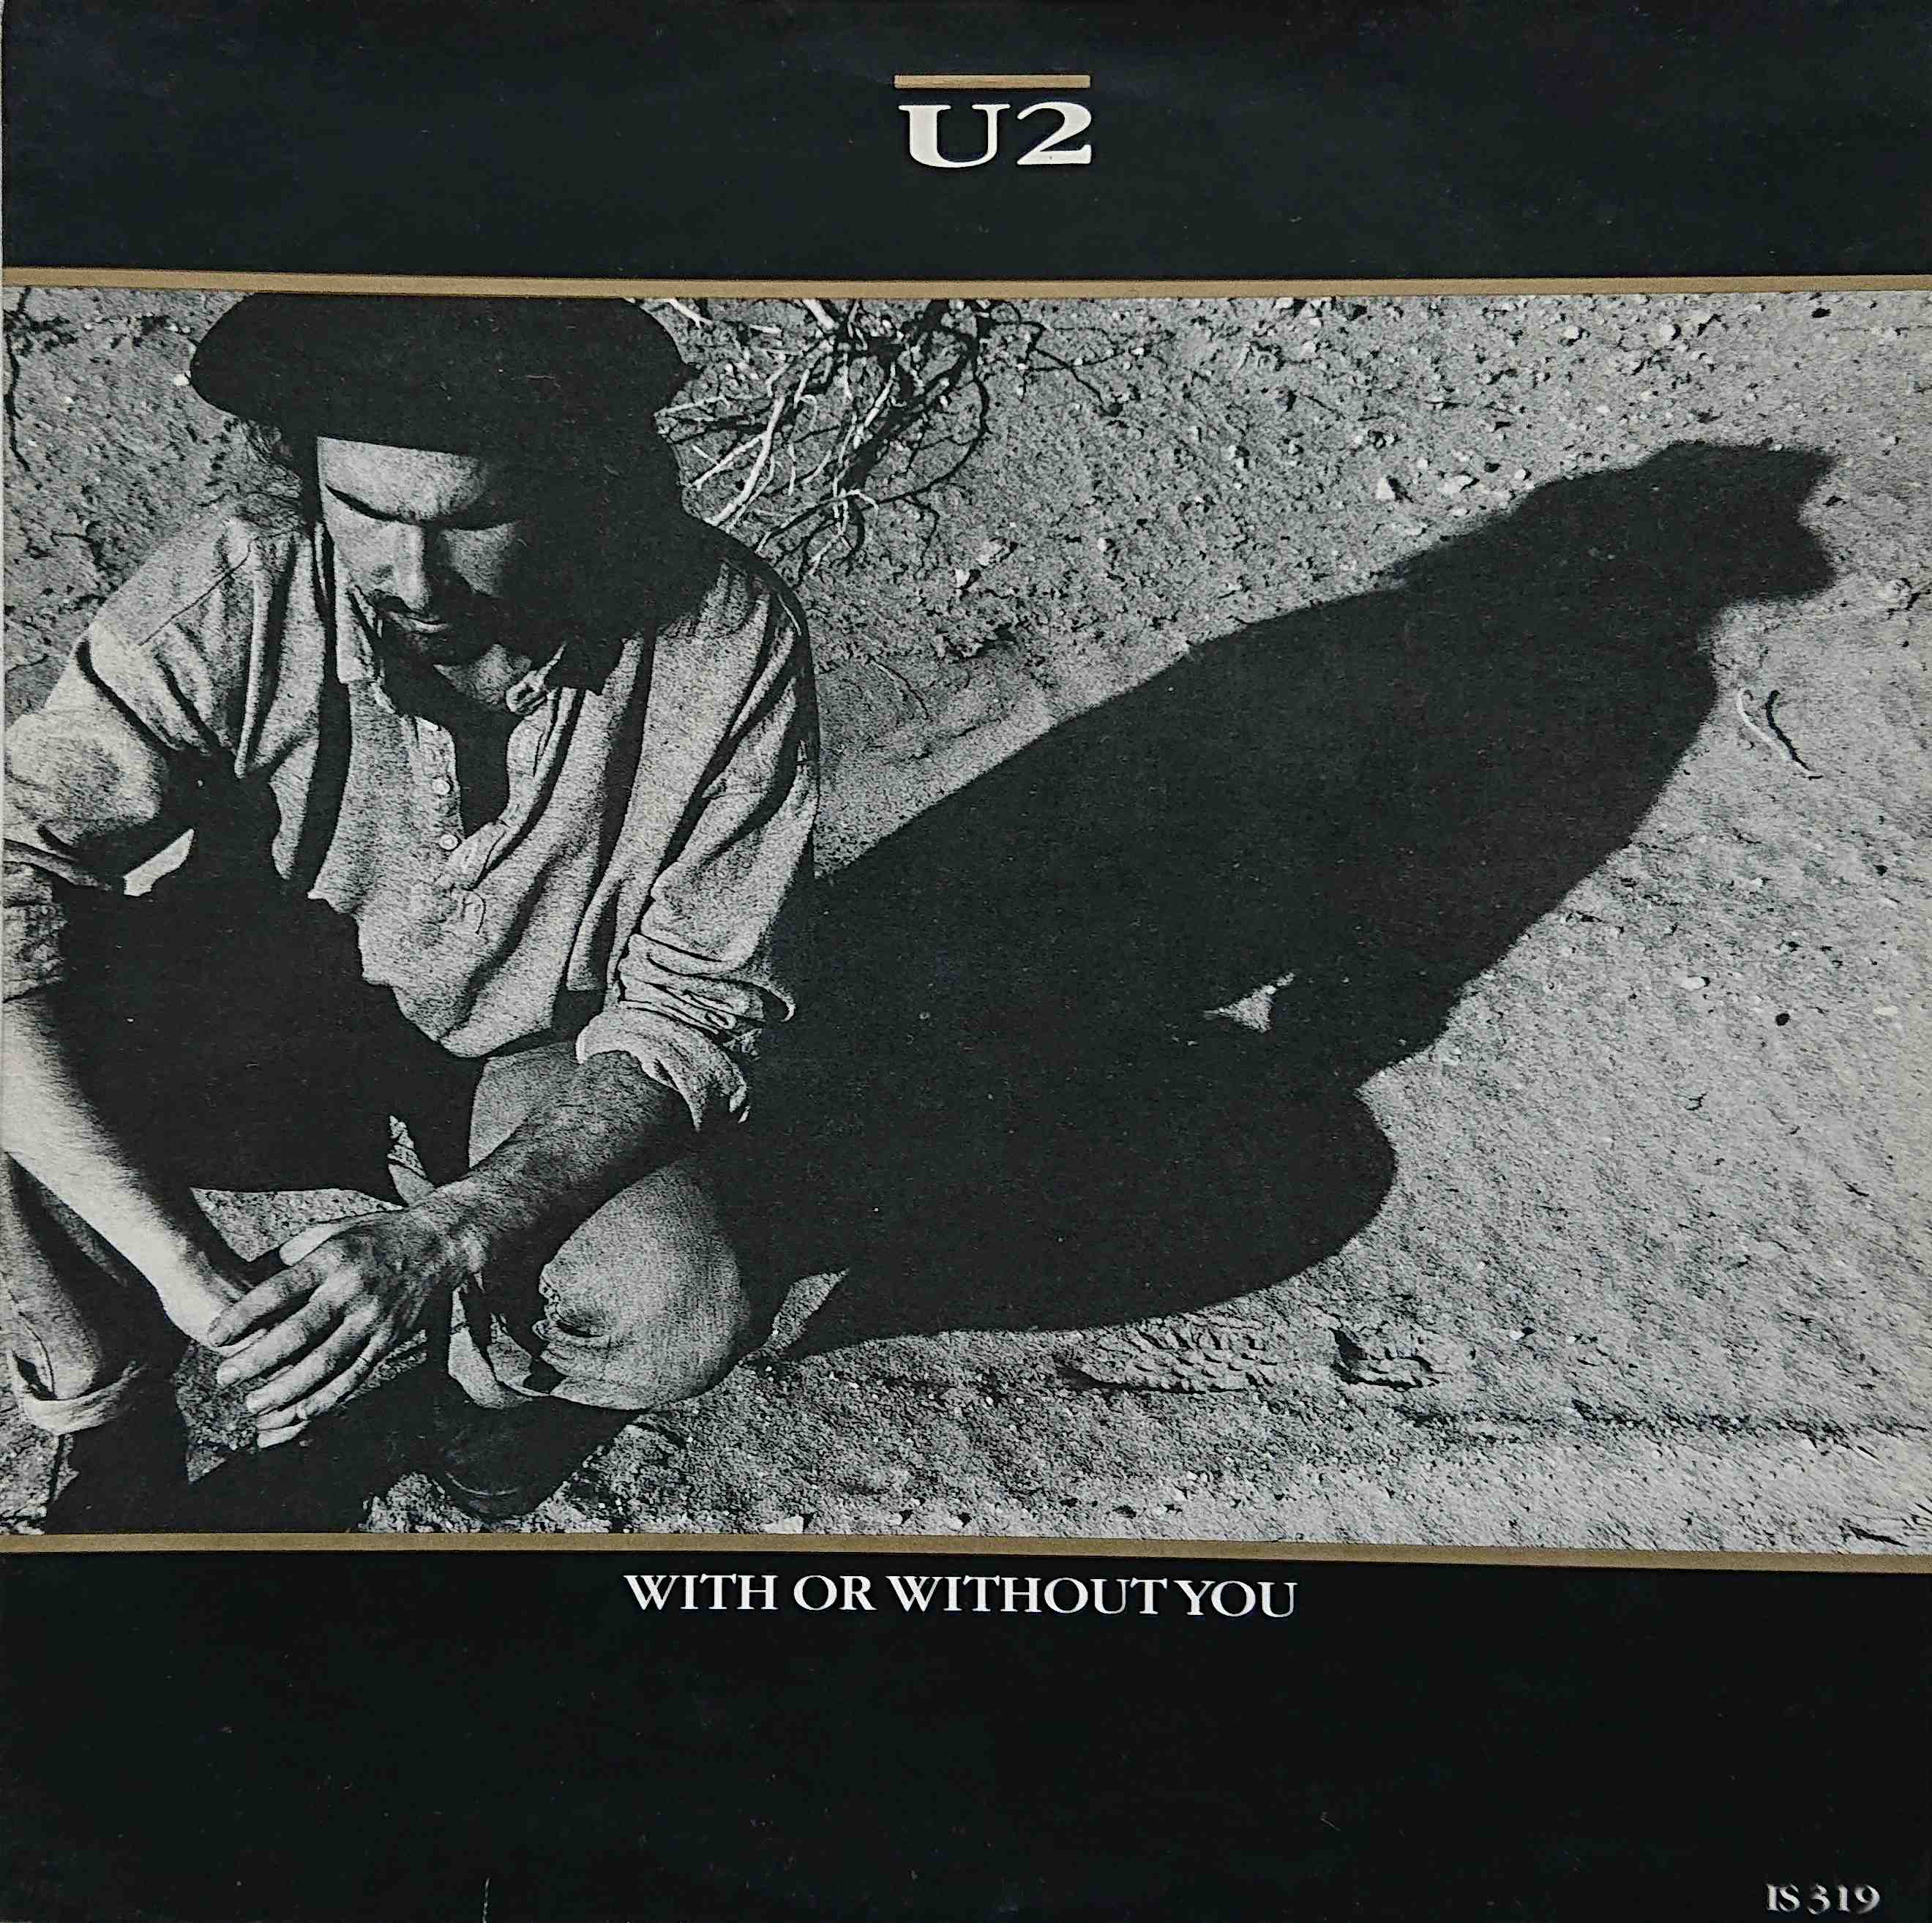 Picture of With or without you by artist U2 